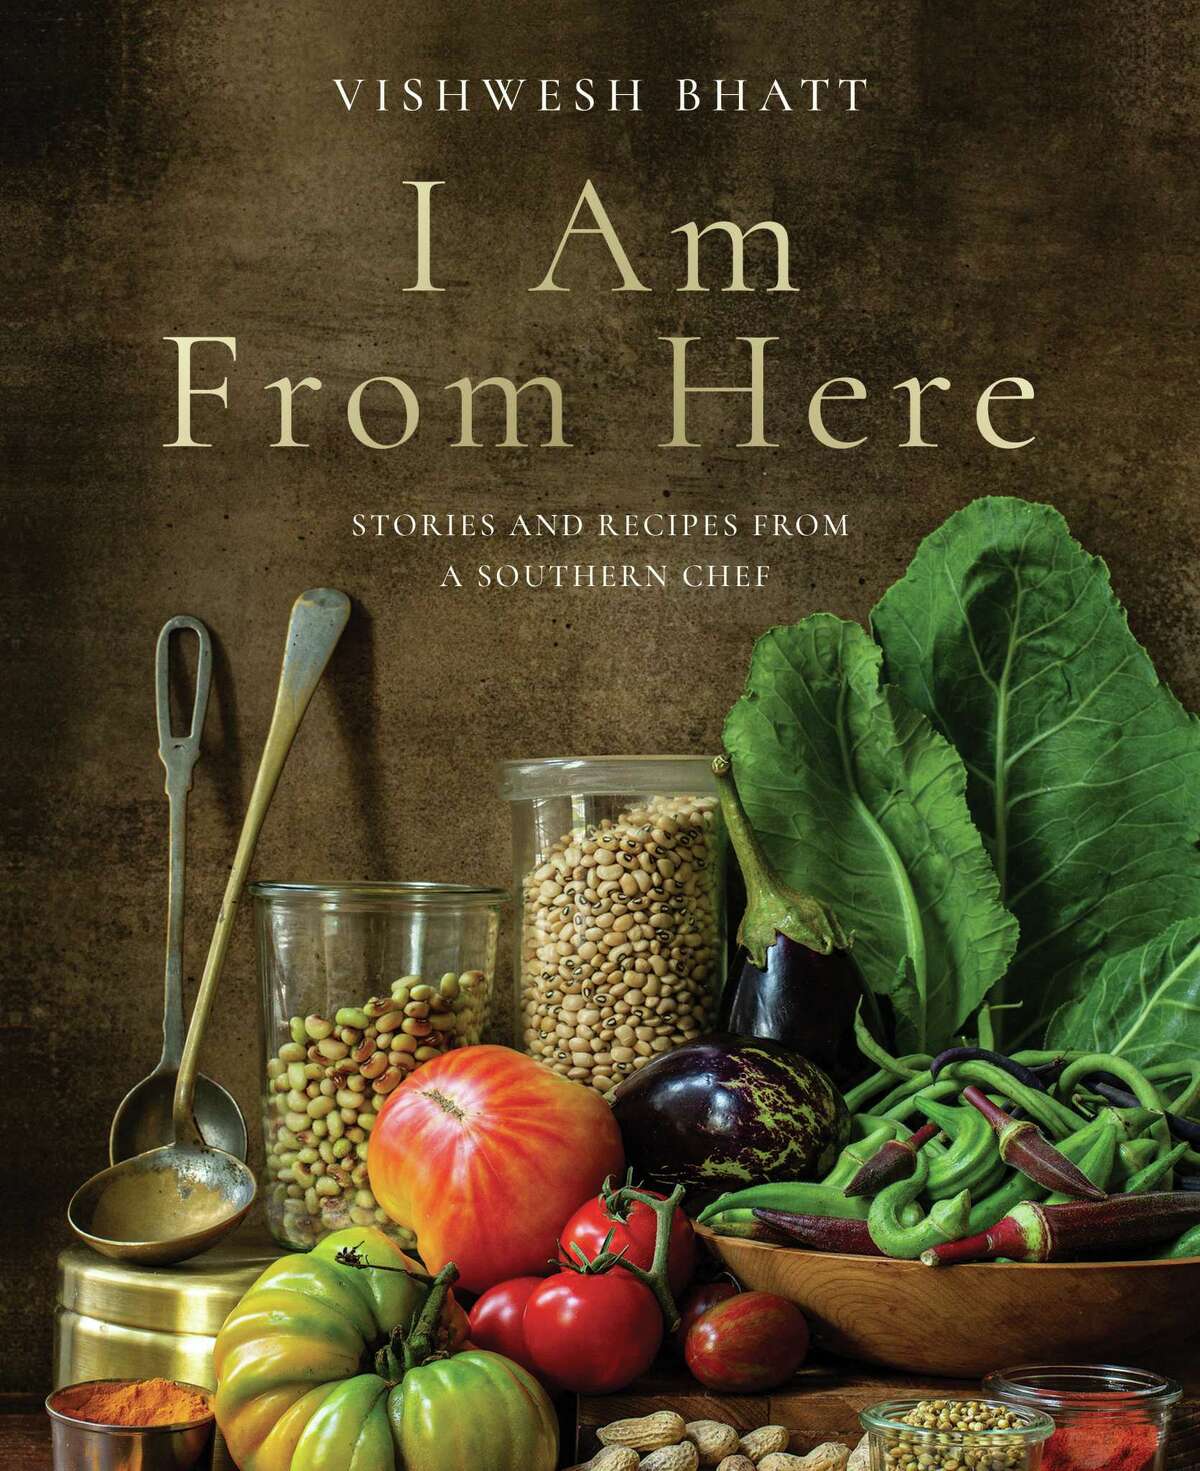 "I Am From Here: Stories and Recipes from a Southern Chef" by Vishwesh Bhatt is one of The Chronicle's top cookbooks of 2022.